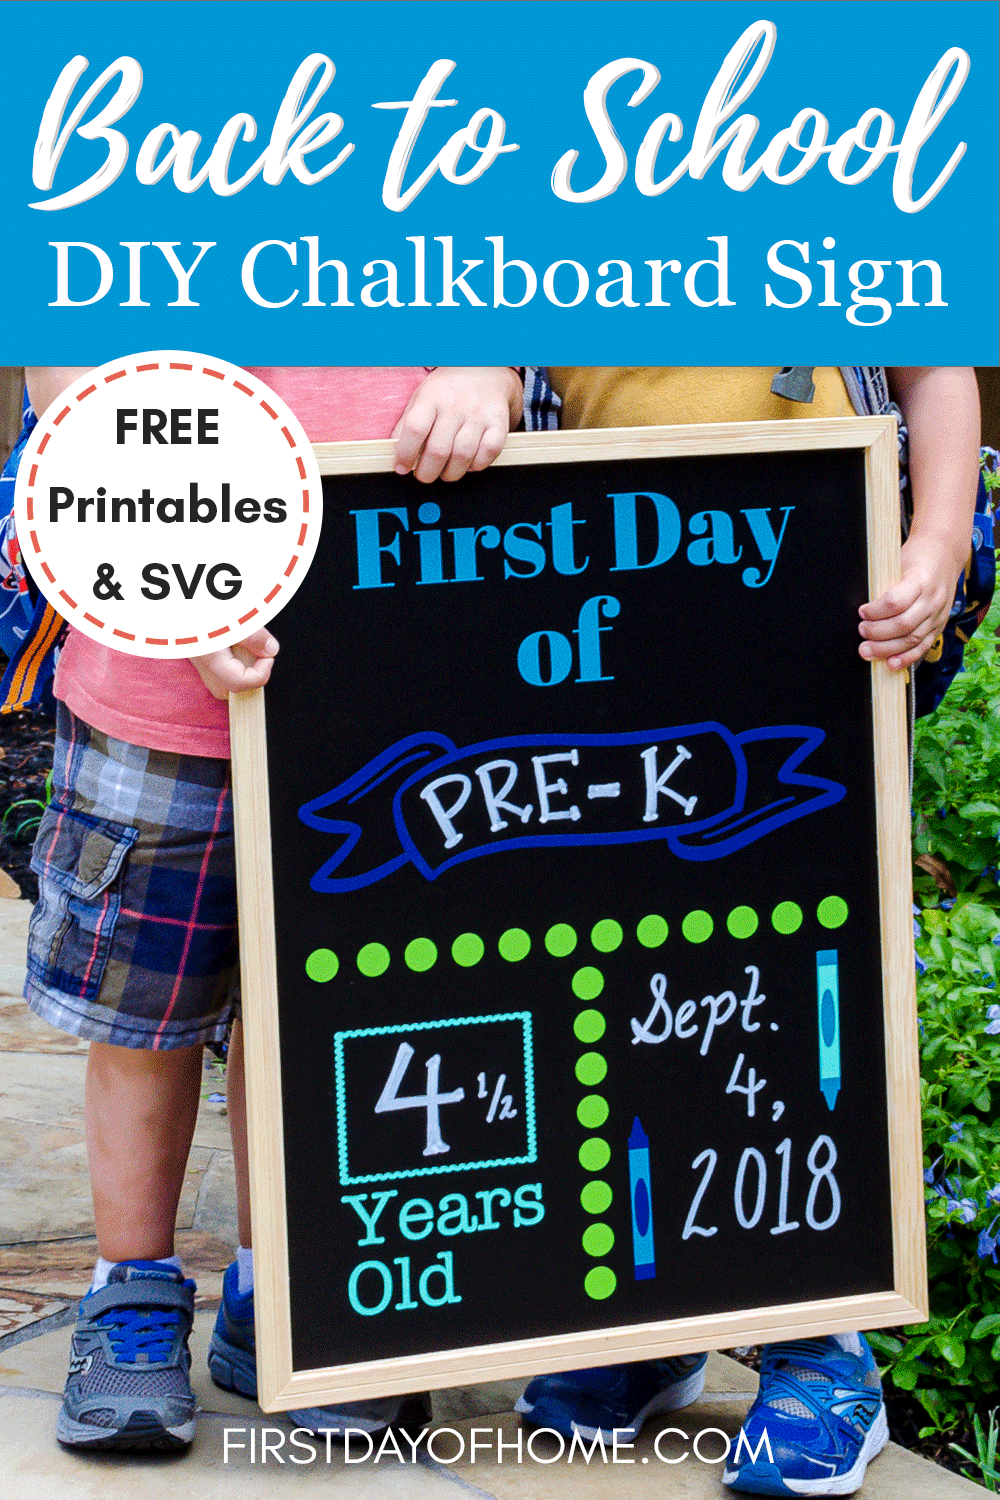 Back to school sign with free printables and SVG files